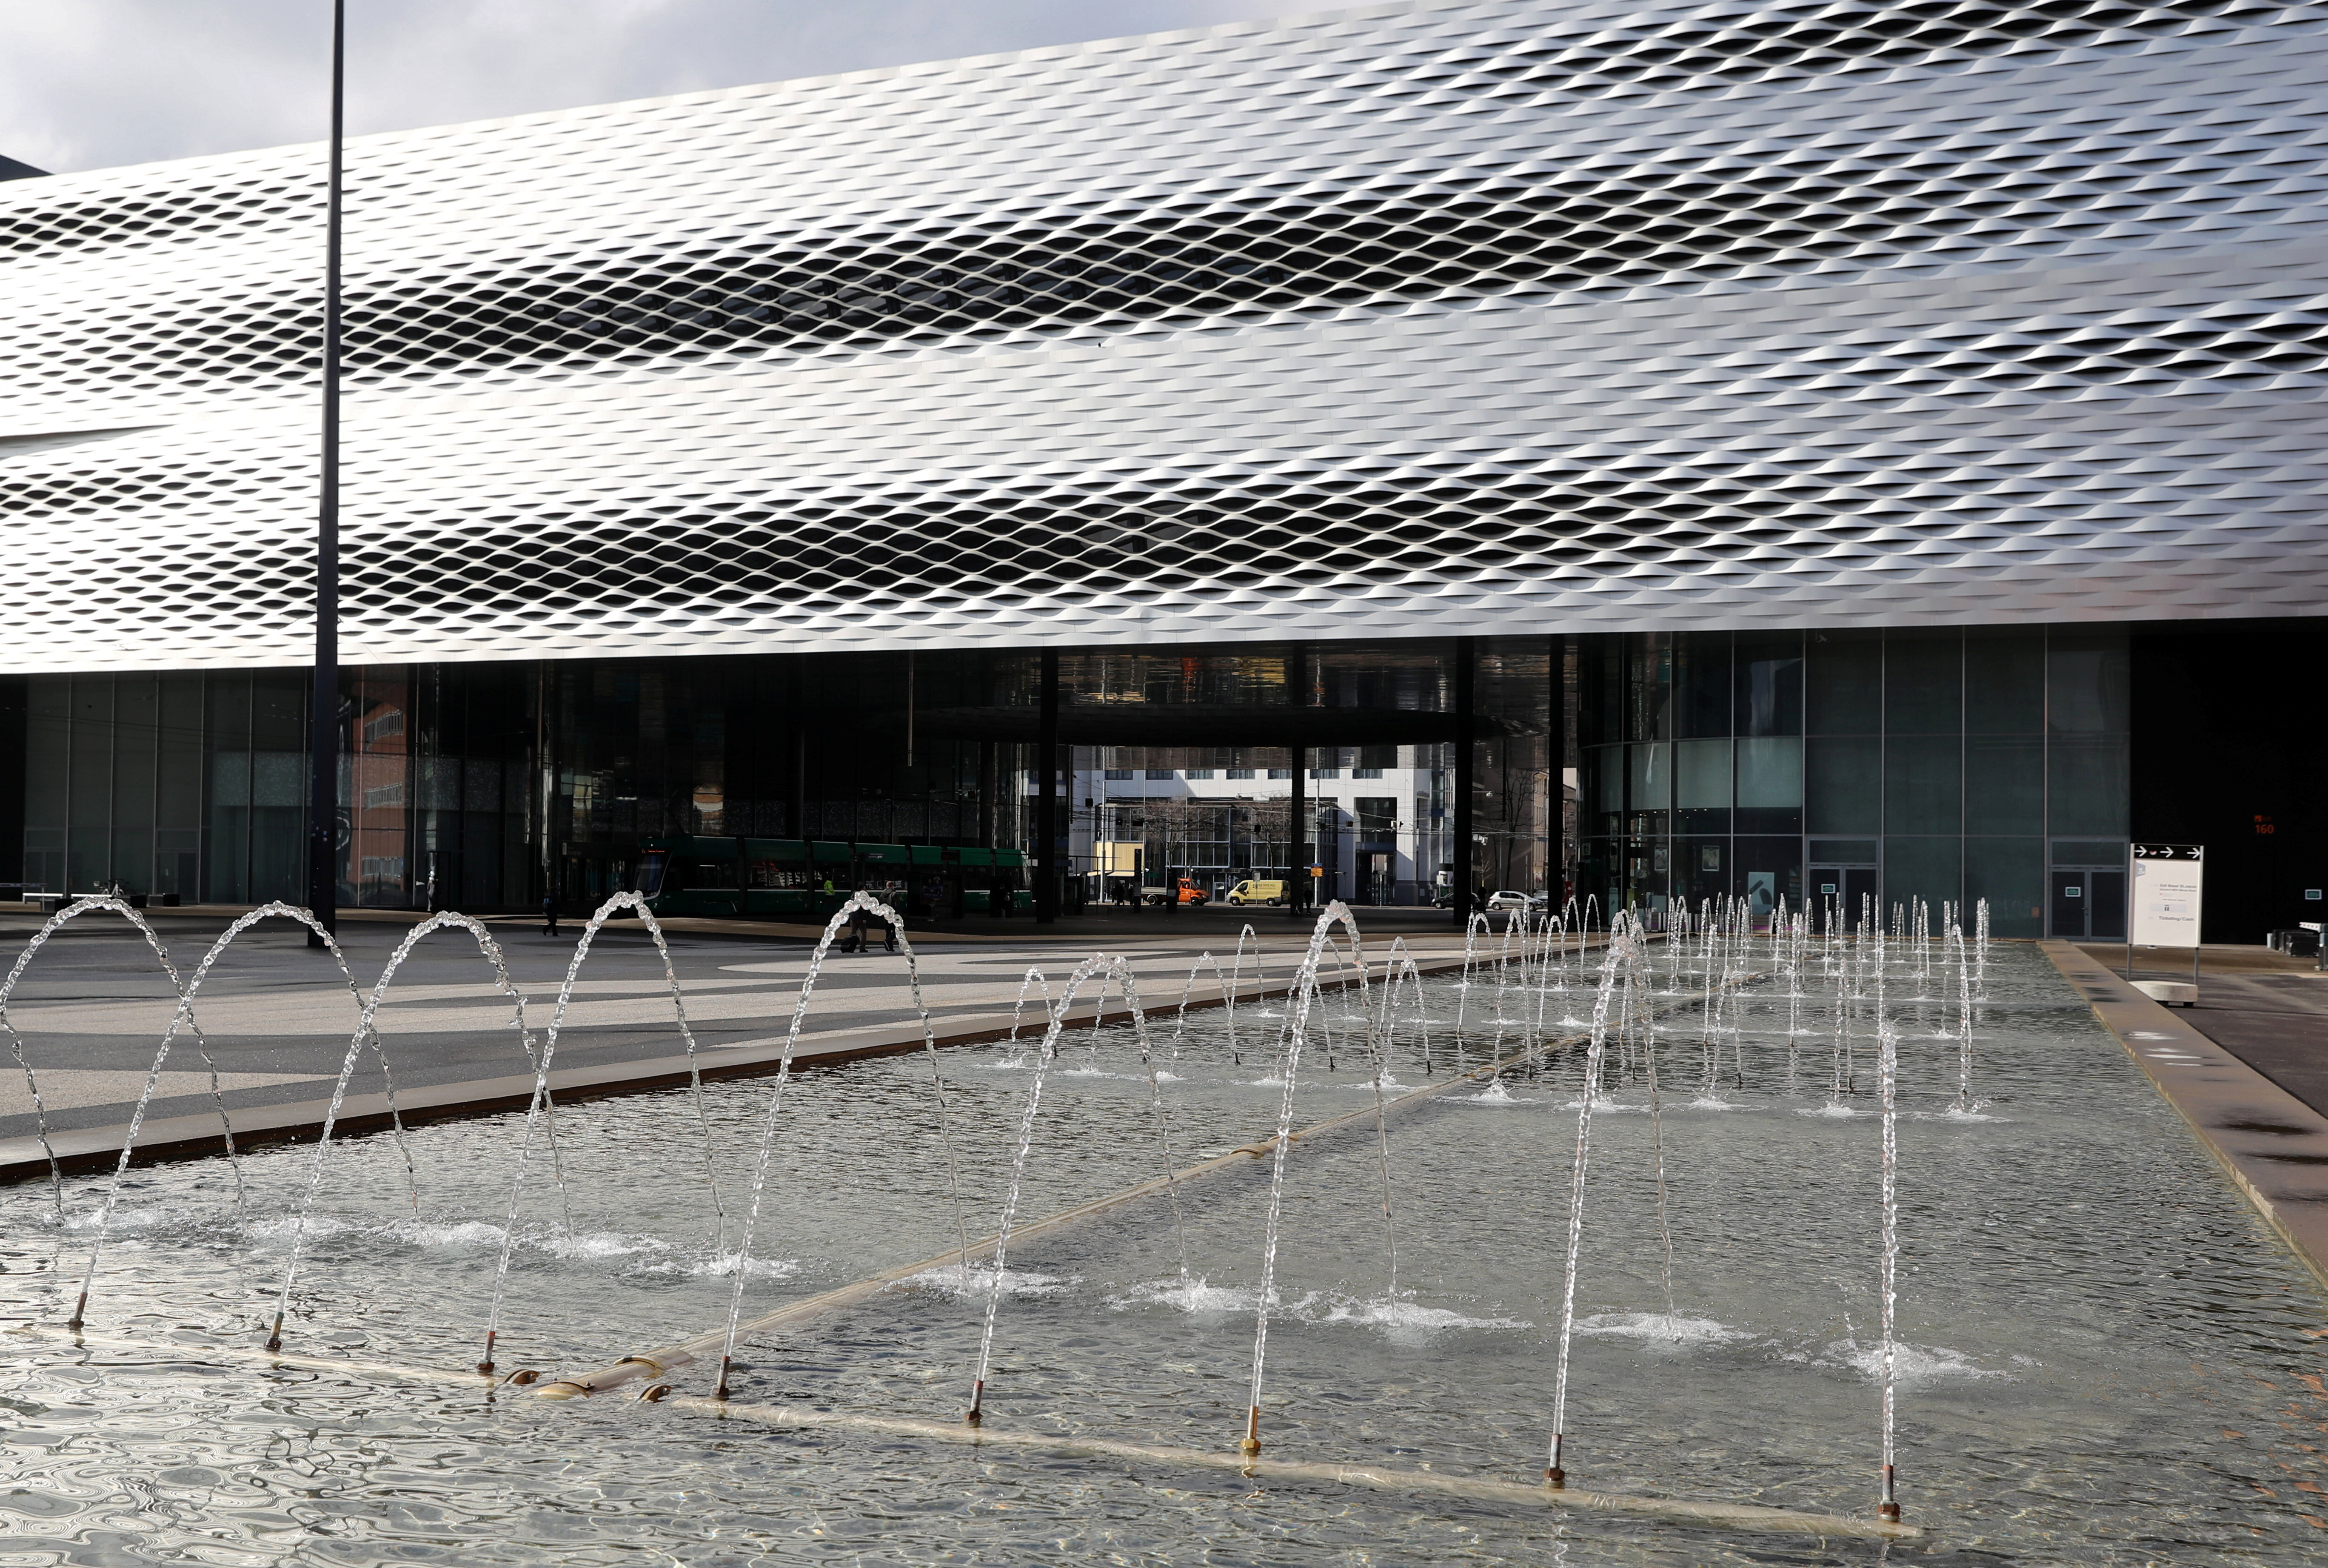 Water gushes from a fountain in front of the halls of Messe Basel fairground designed by Swiss architects Herzog & de Meuron in Basel